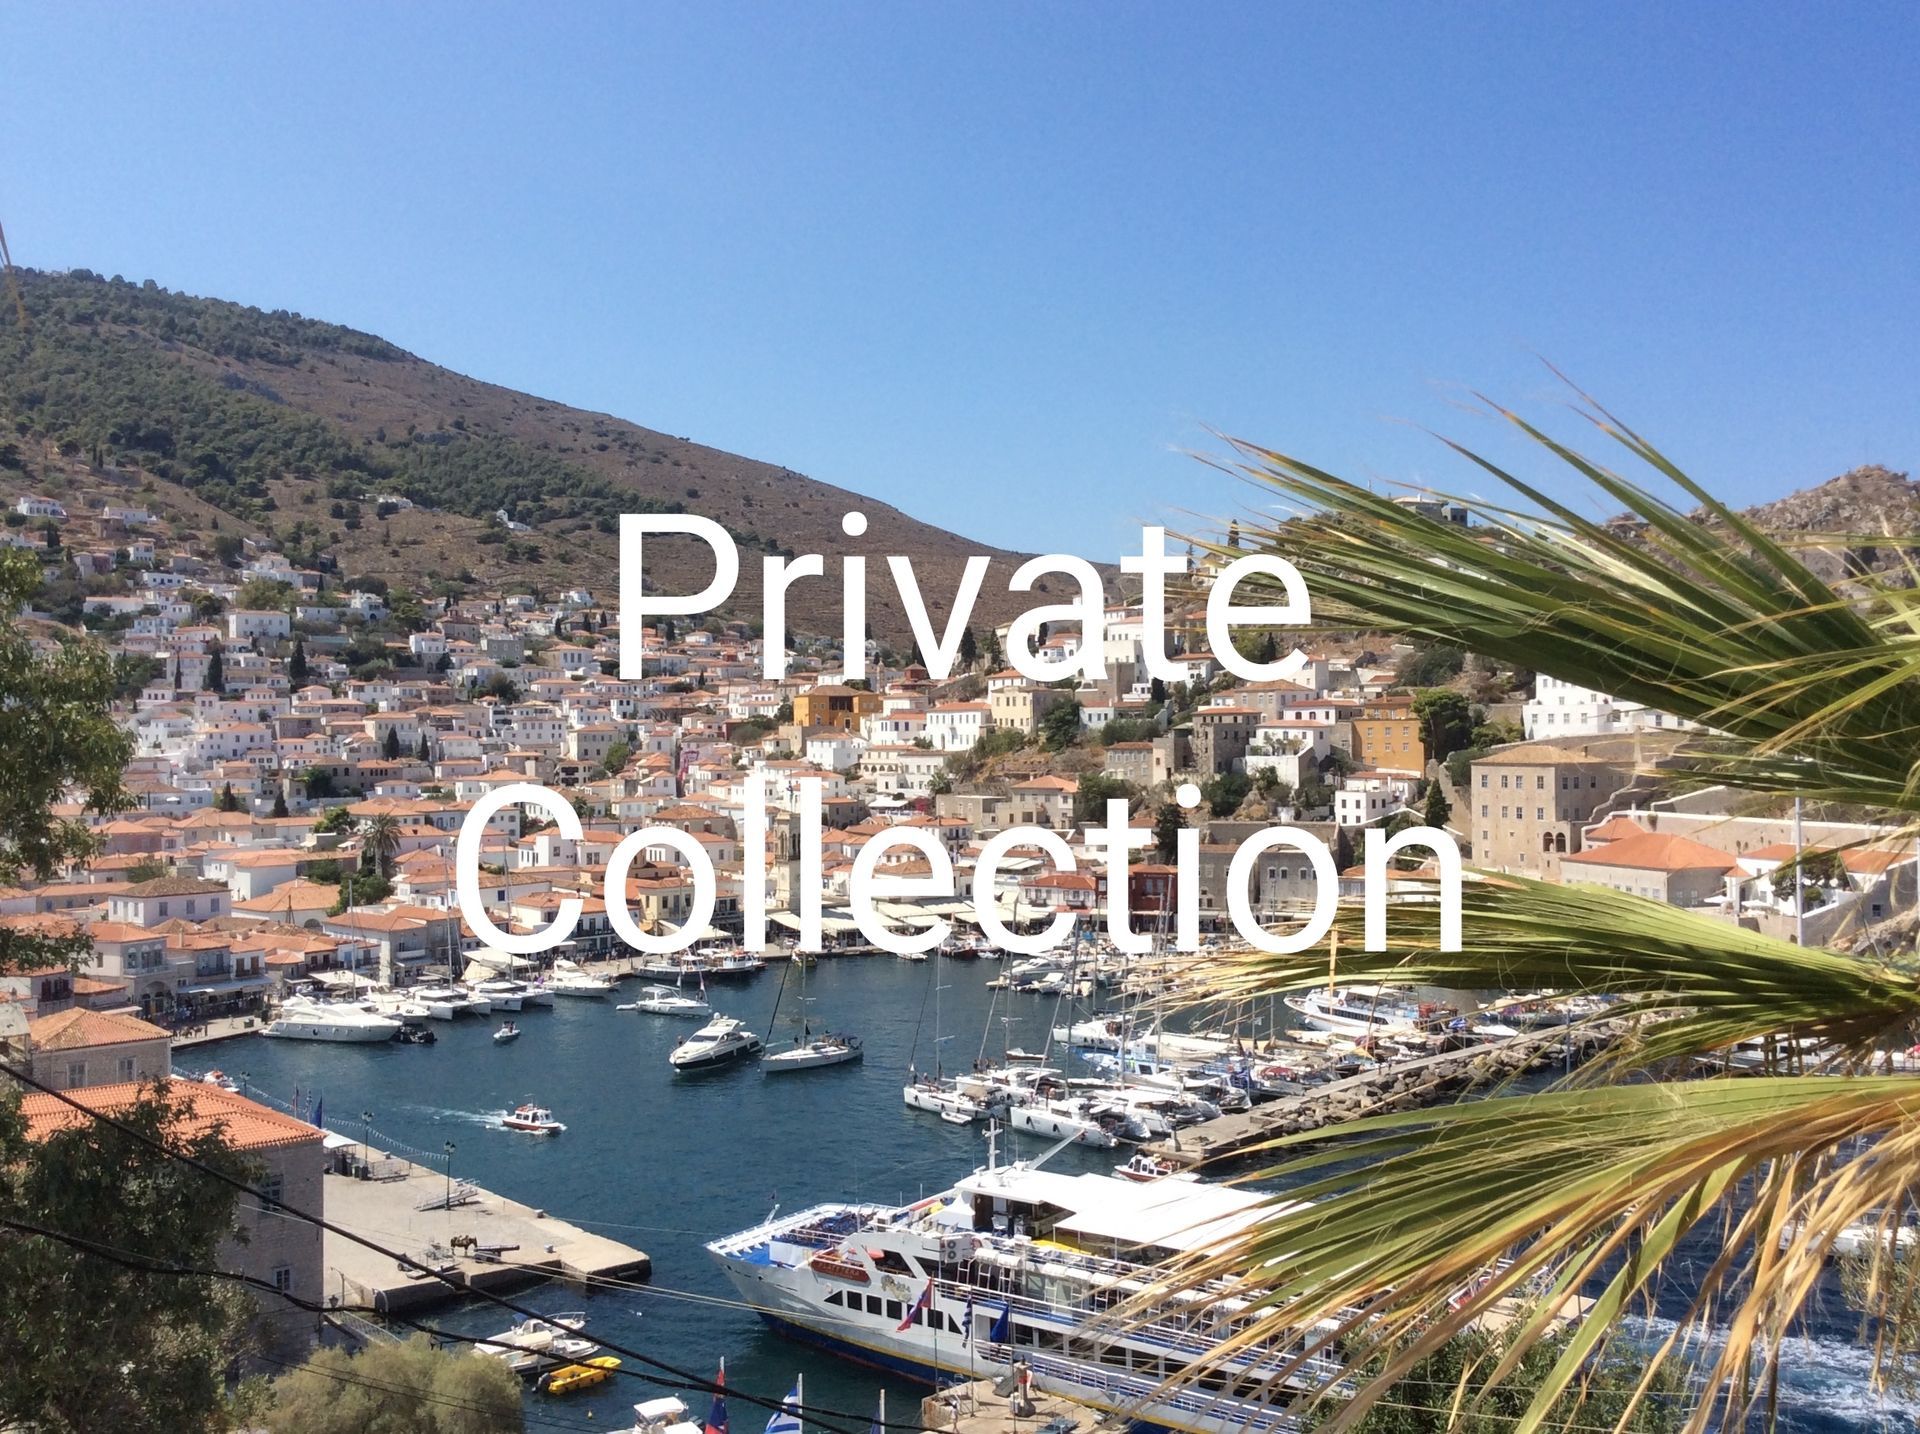 Detached, 2 bedroom, property for sale on Hydra Island Greece